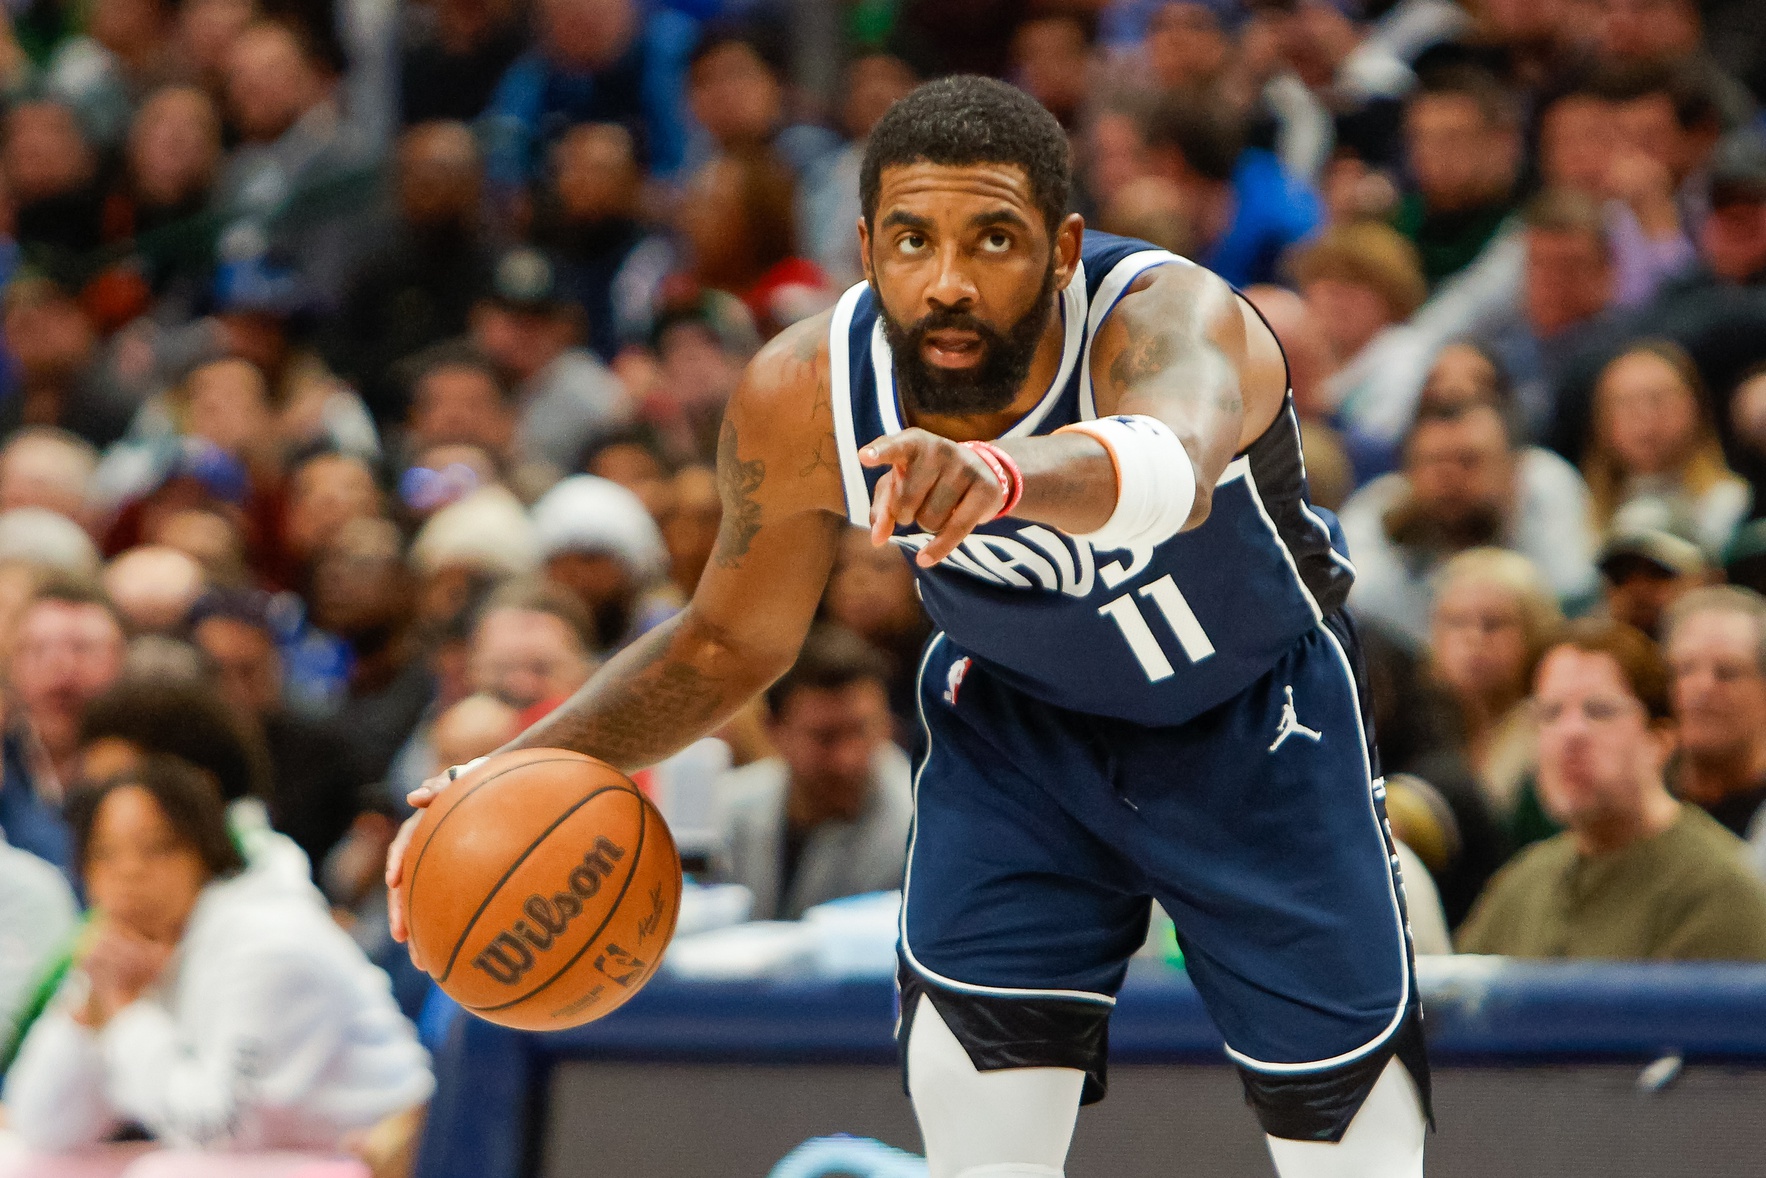 Kyrie Irving's 30-Point Game and Stylish Anta KAI 1 'Chief Hélà' Sneakers Lead Dallas Mavericks to Victory